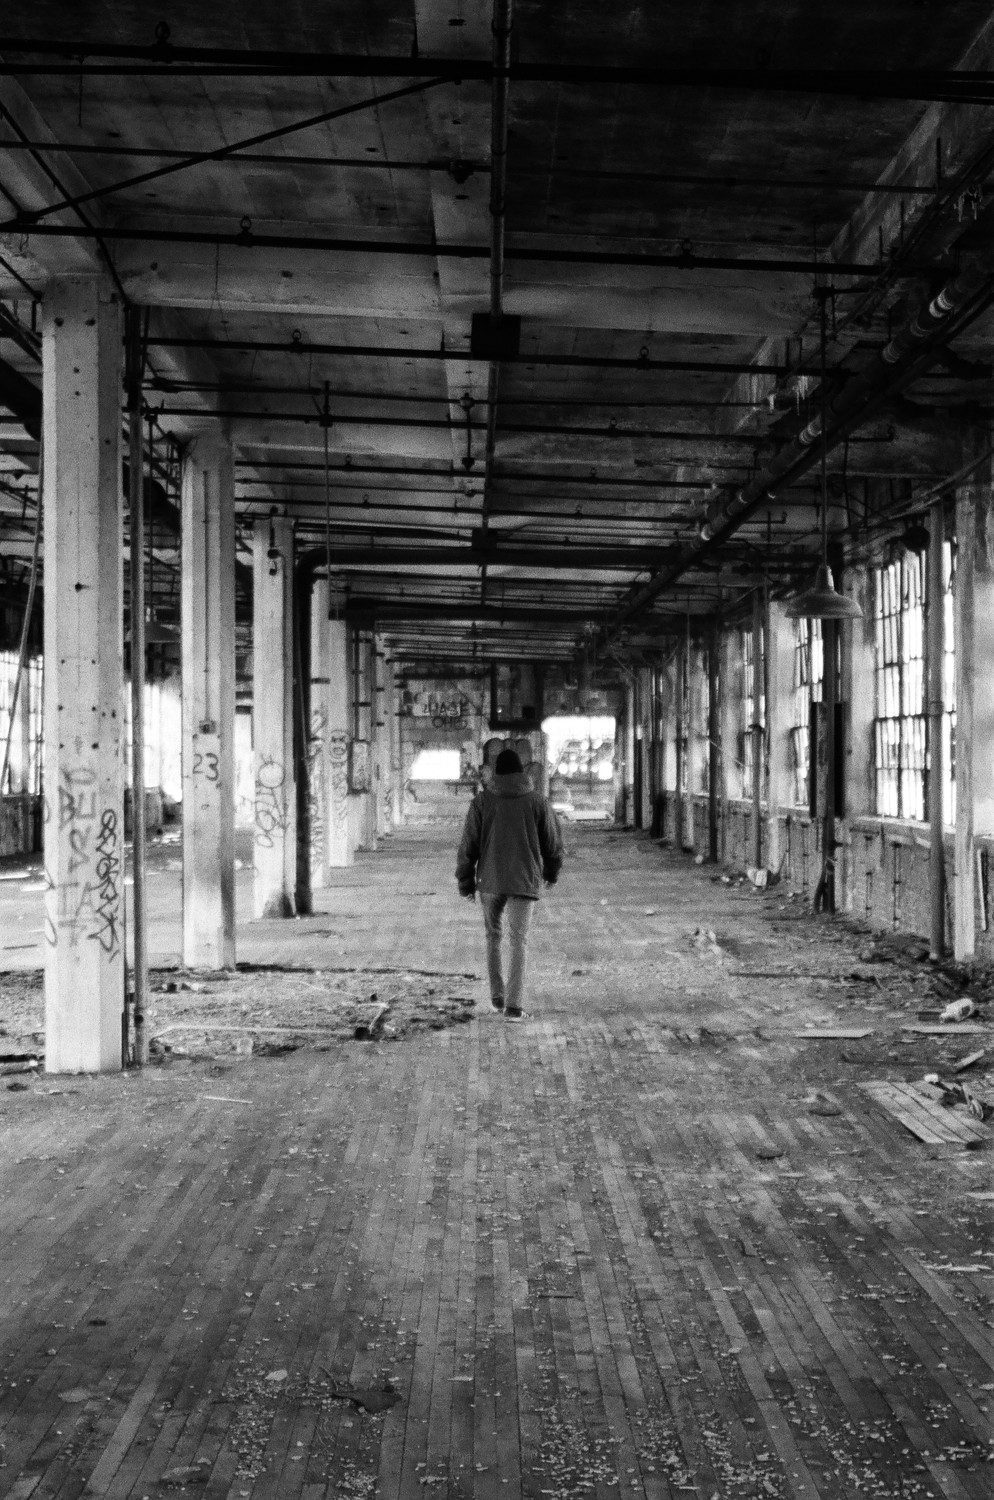 A person walking away in a large run-down building